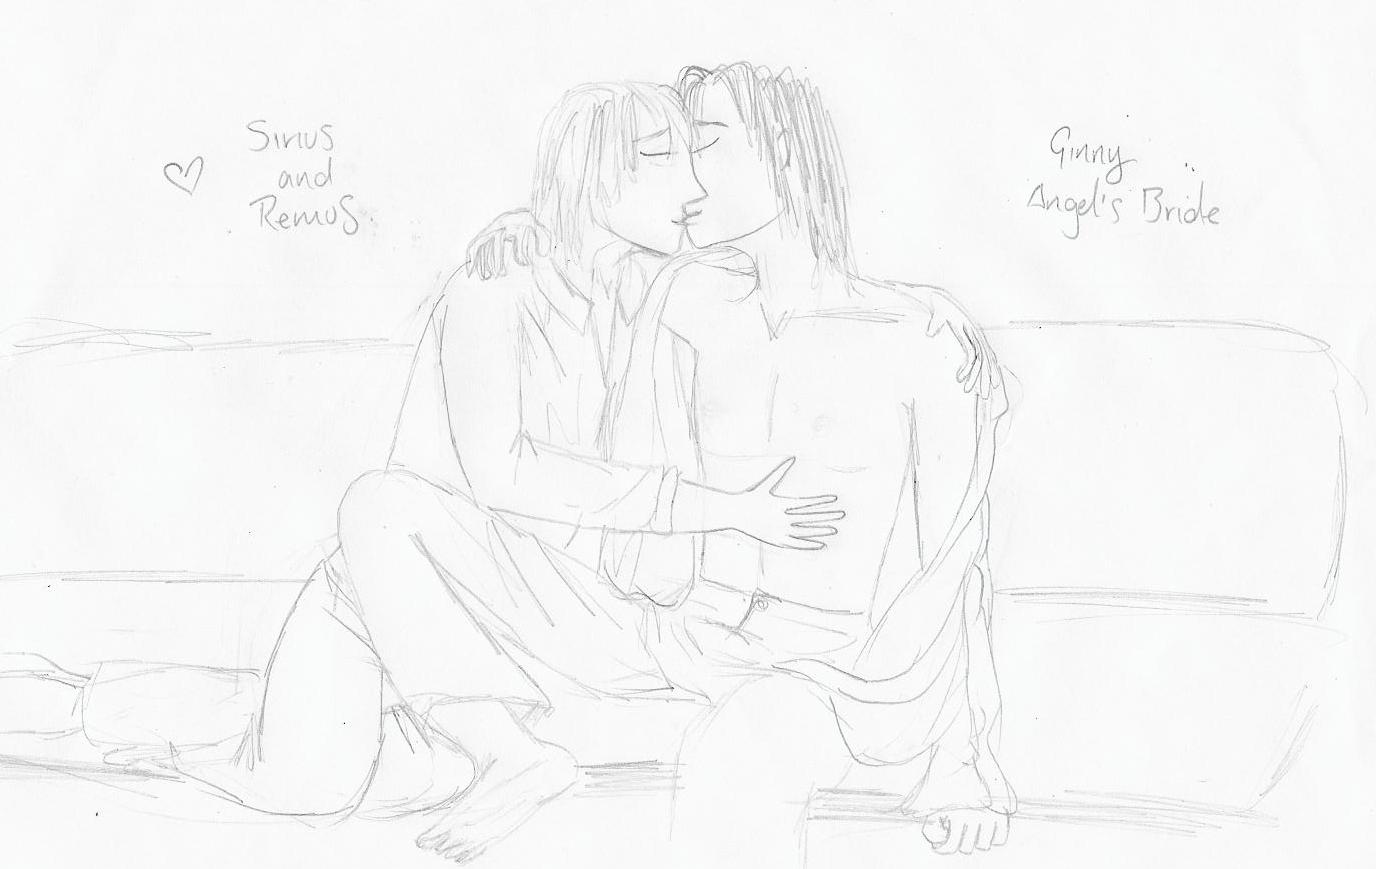 Sirius and Remus kissing by Angel_s_Bride